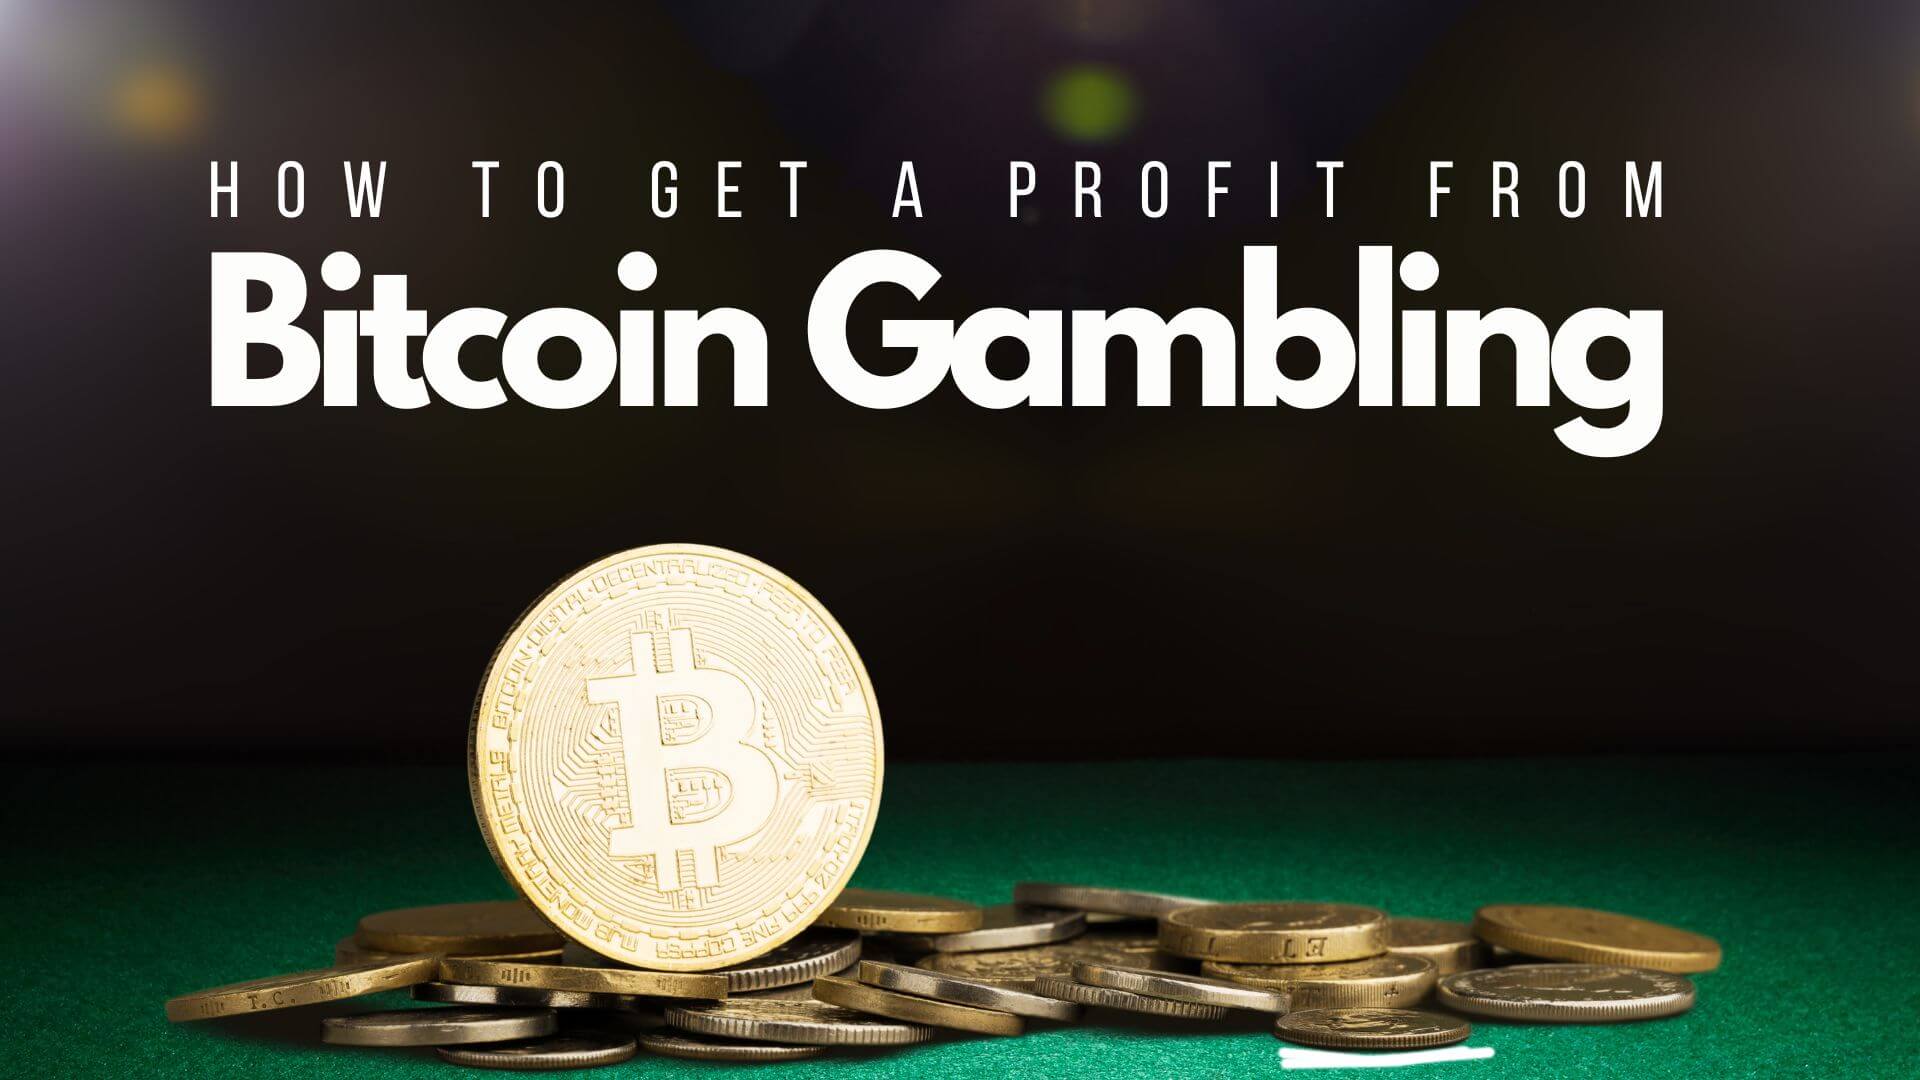 How to Get a Profit from Bitcoin Gambling